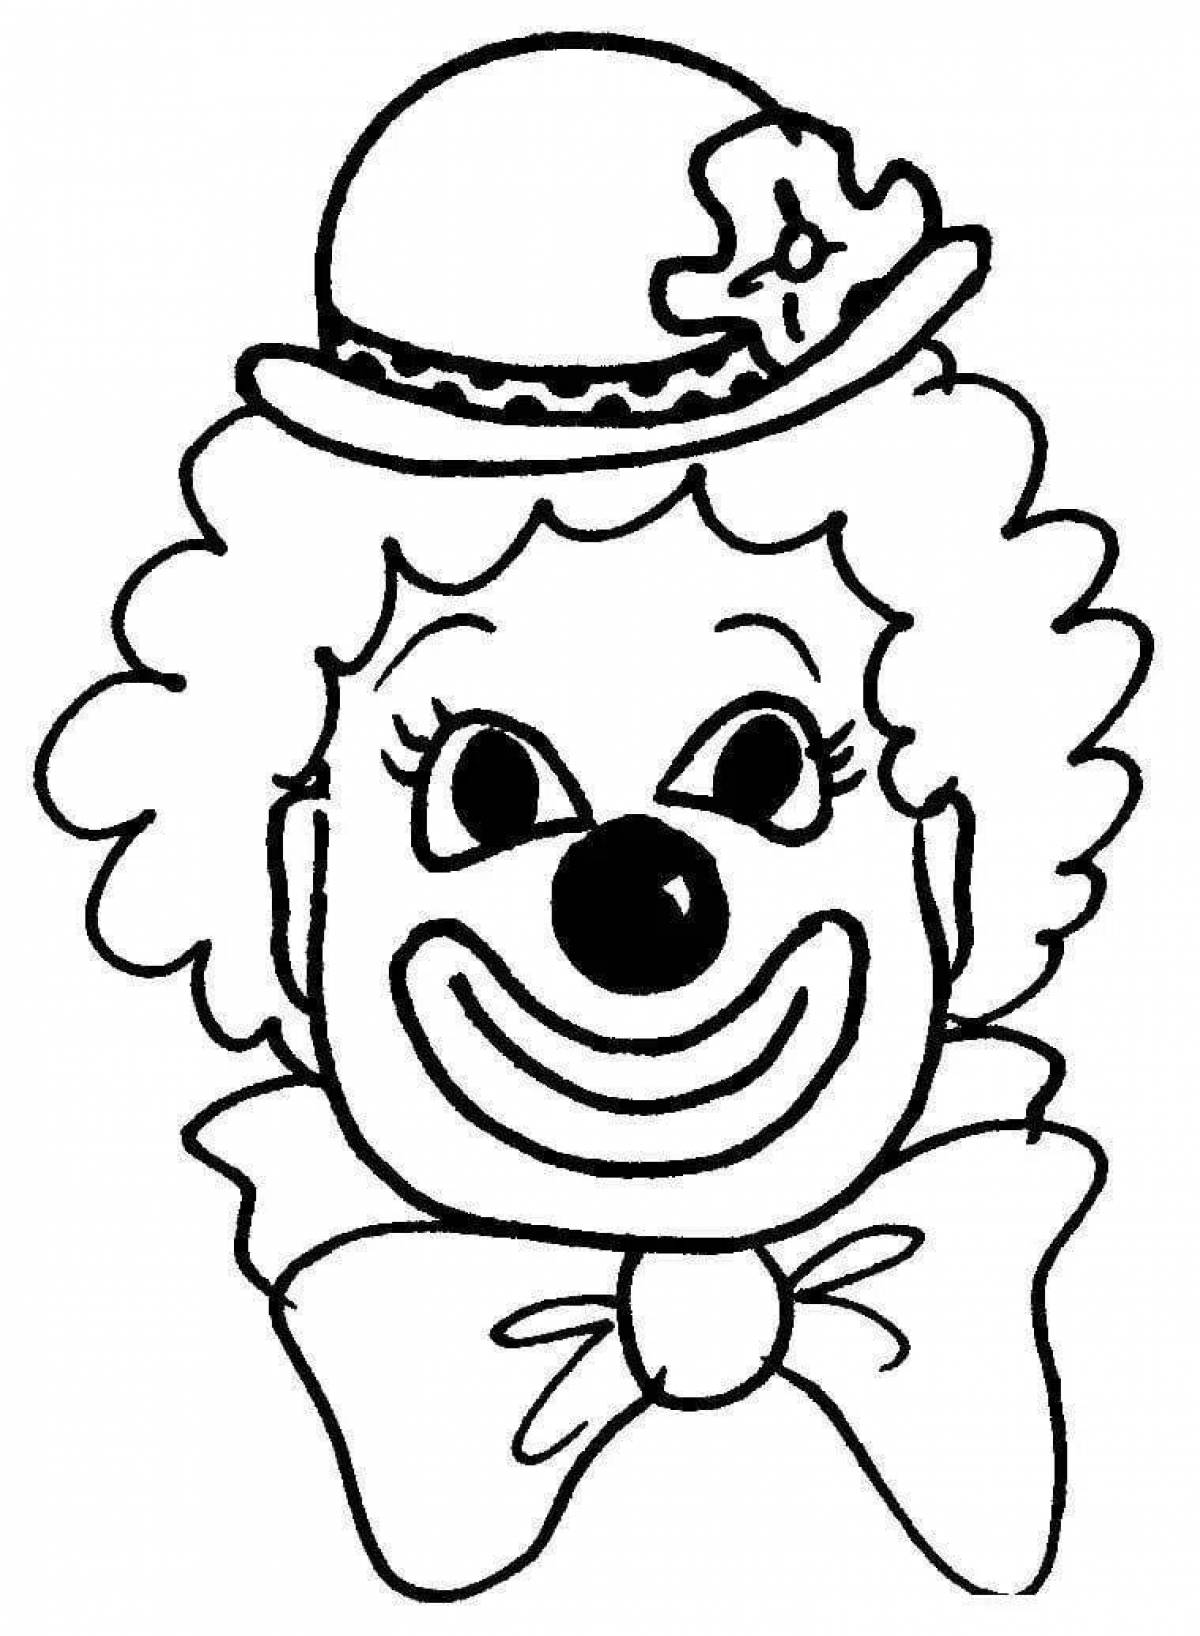 Surreal clown face coloring page